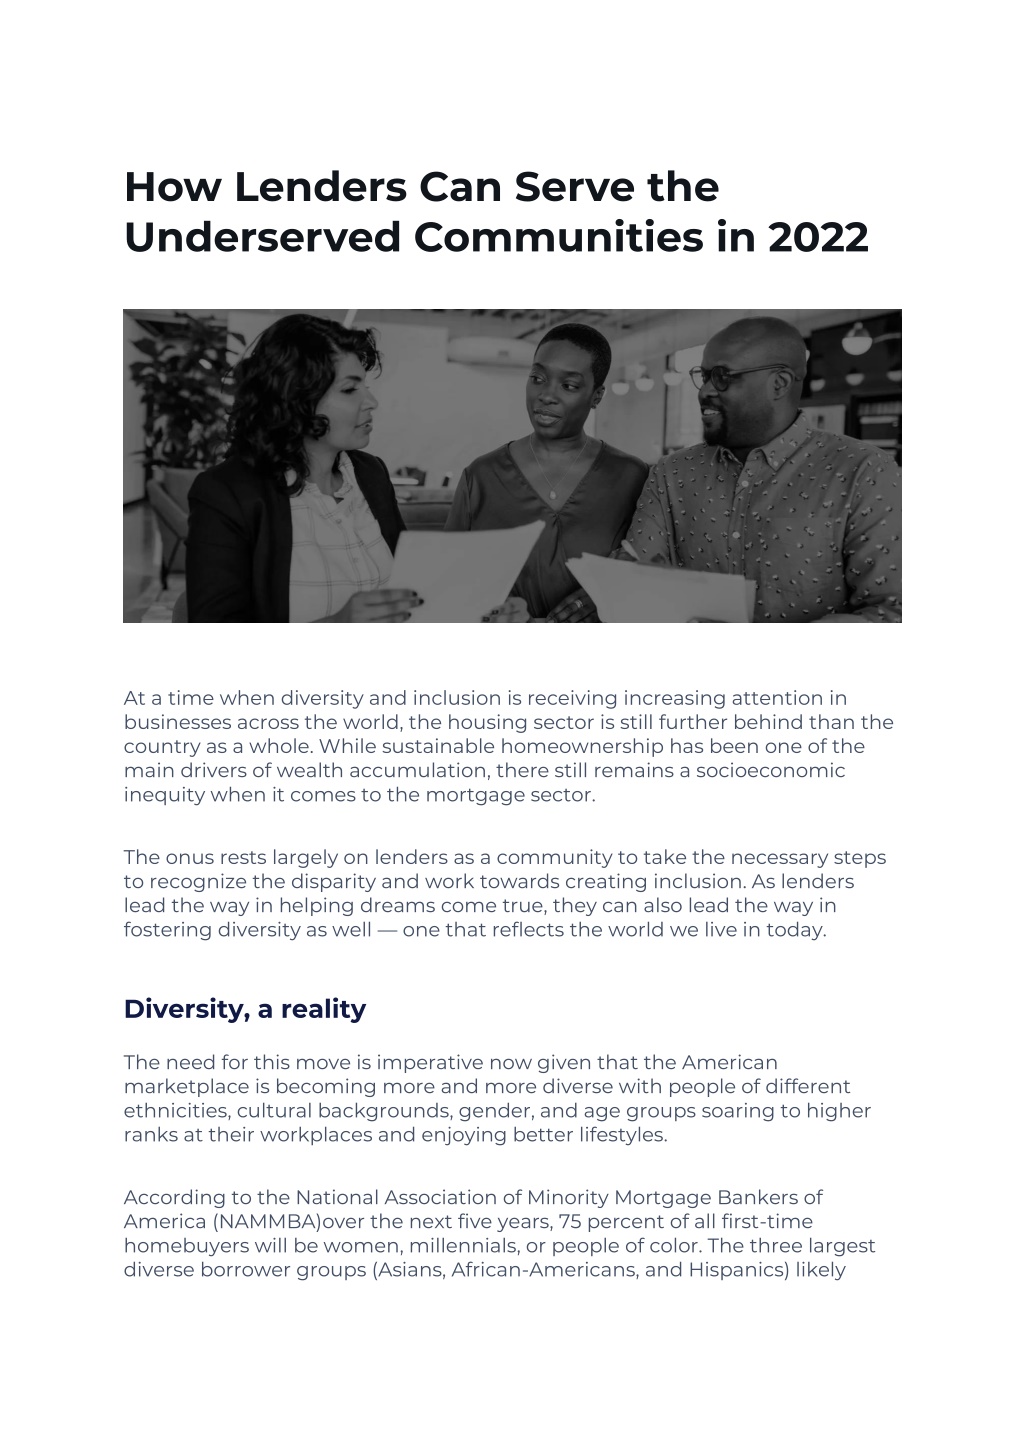 essay about underserved communities